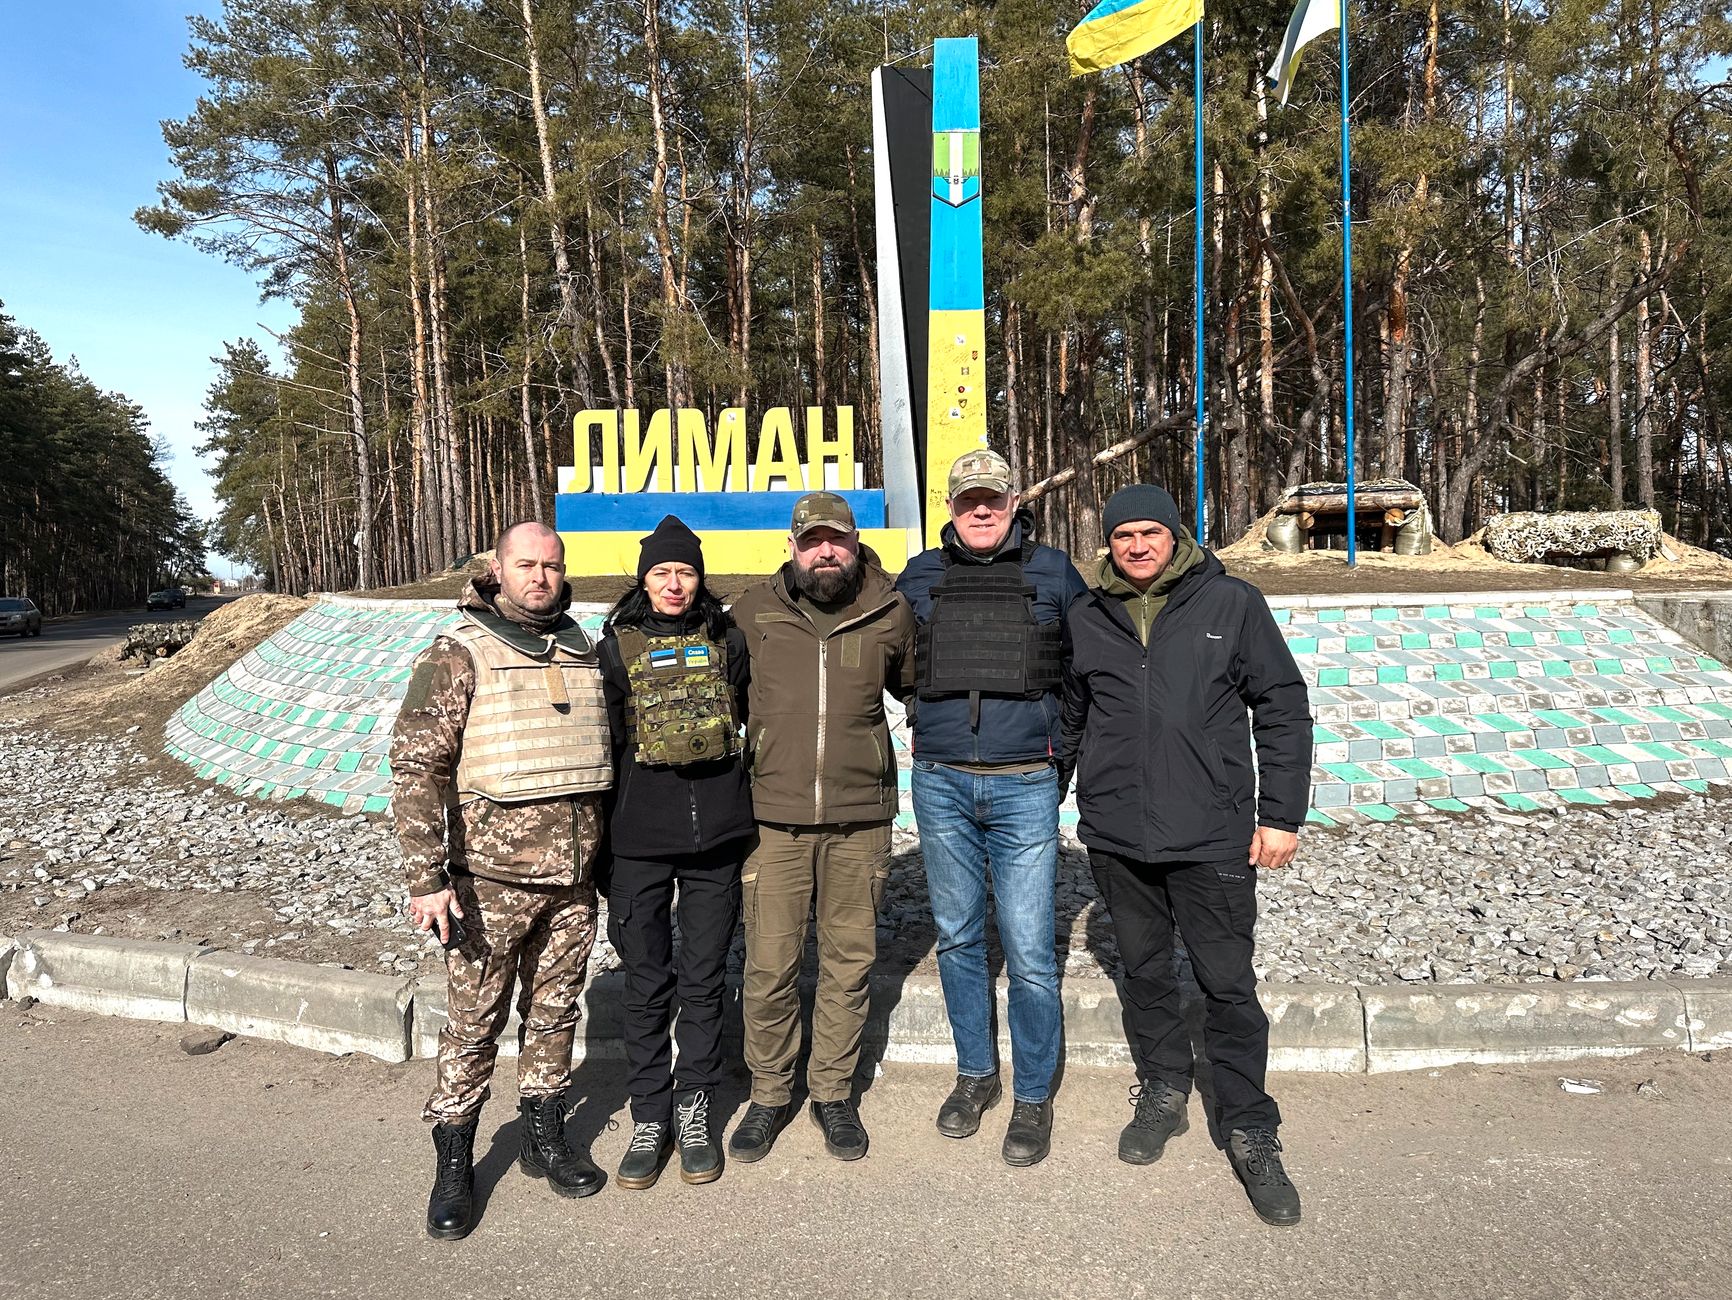 From left to right, Kolk’s husband, Kolk, Dmitro Drey, Mihkelson, and another volunteer outside of Lyman, approximately 12 km behind the front line